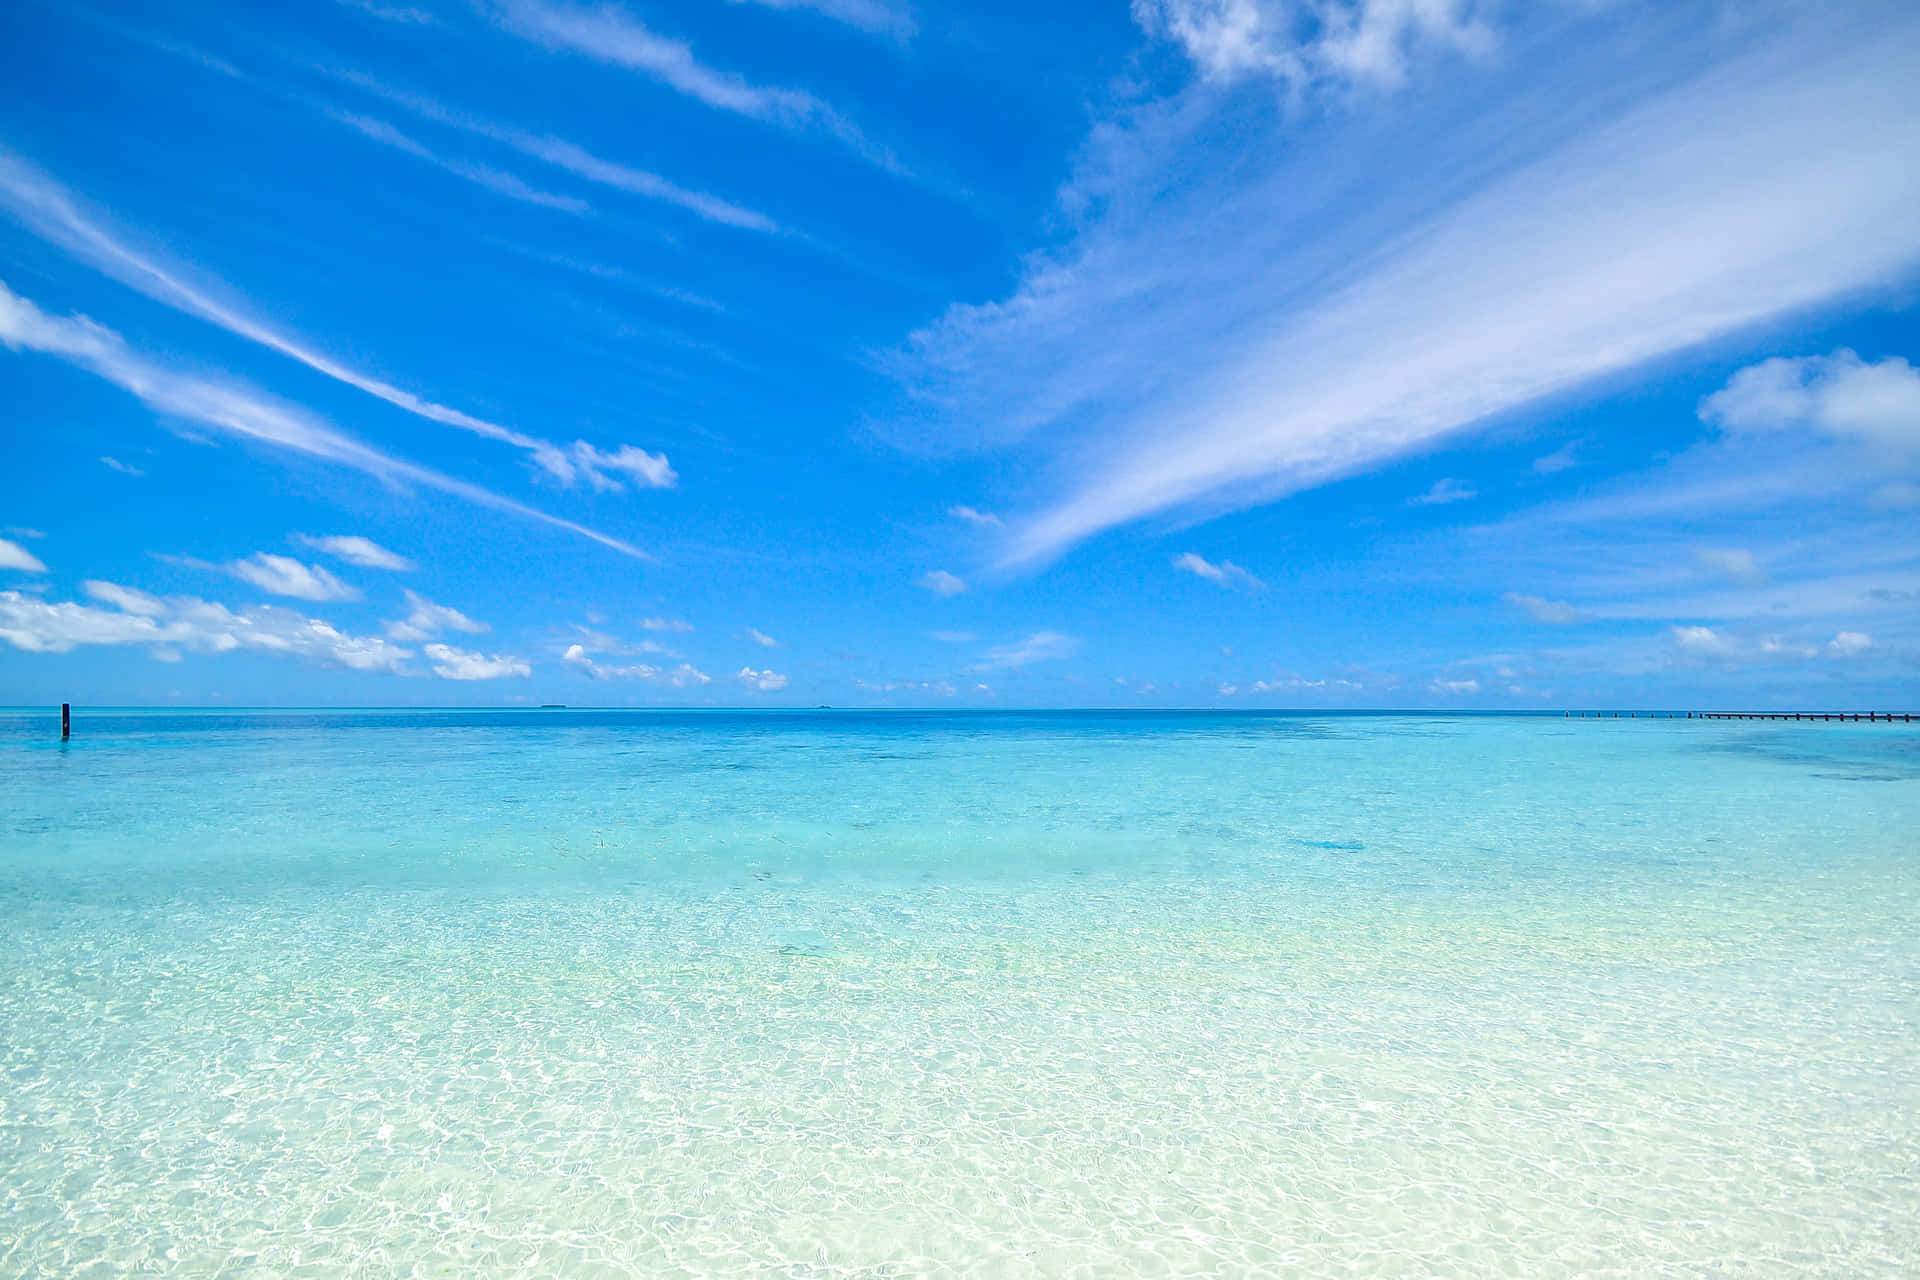 "Catch a glimpse of breathtaking beauty with a tranquil beach and cloudy blue sky" Wallpaper